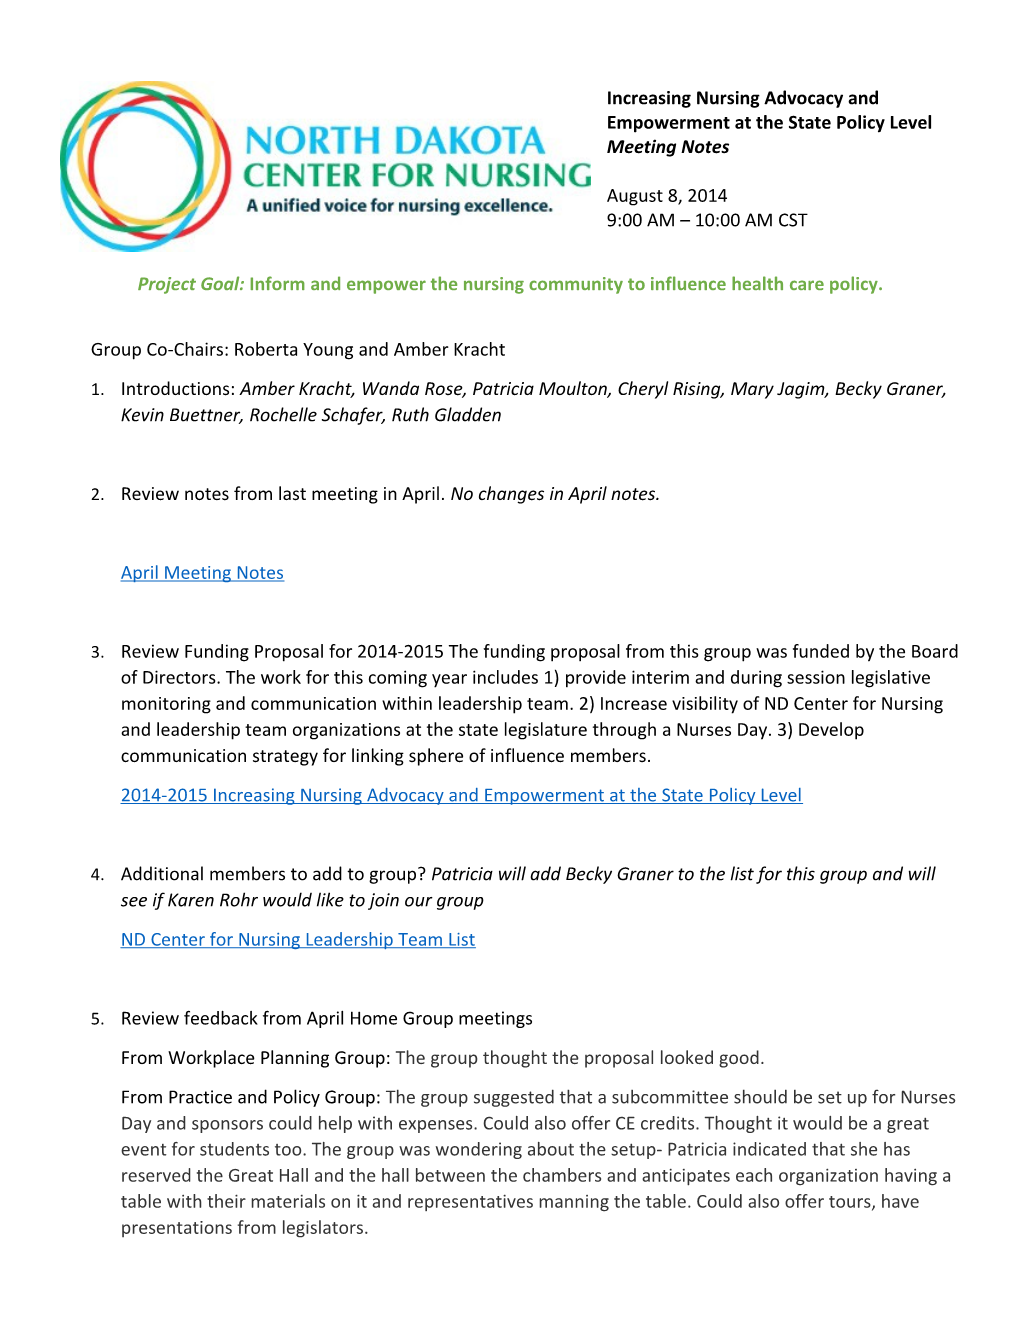 Increasing Nursing Advocacy and Empowerment at the State Policy Levelmeeting Notes